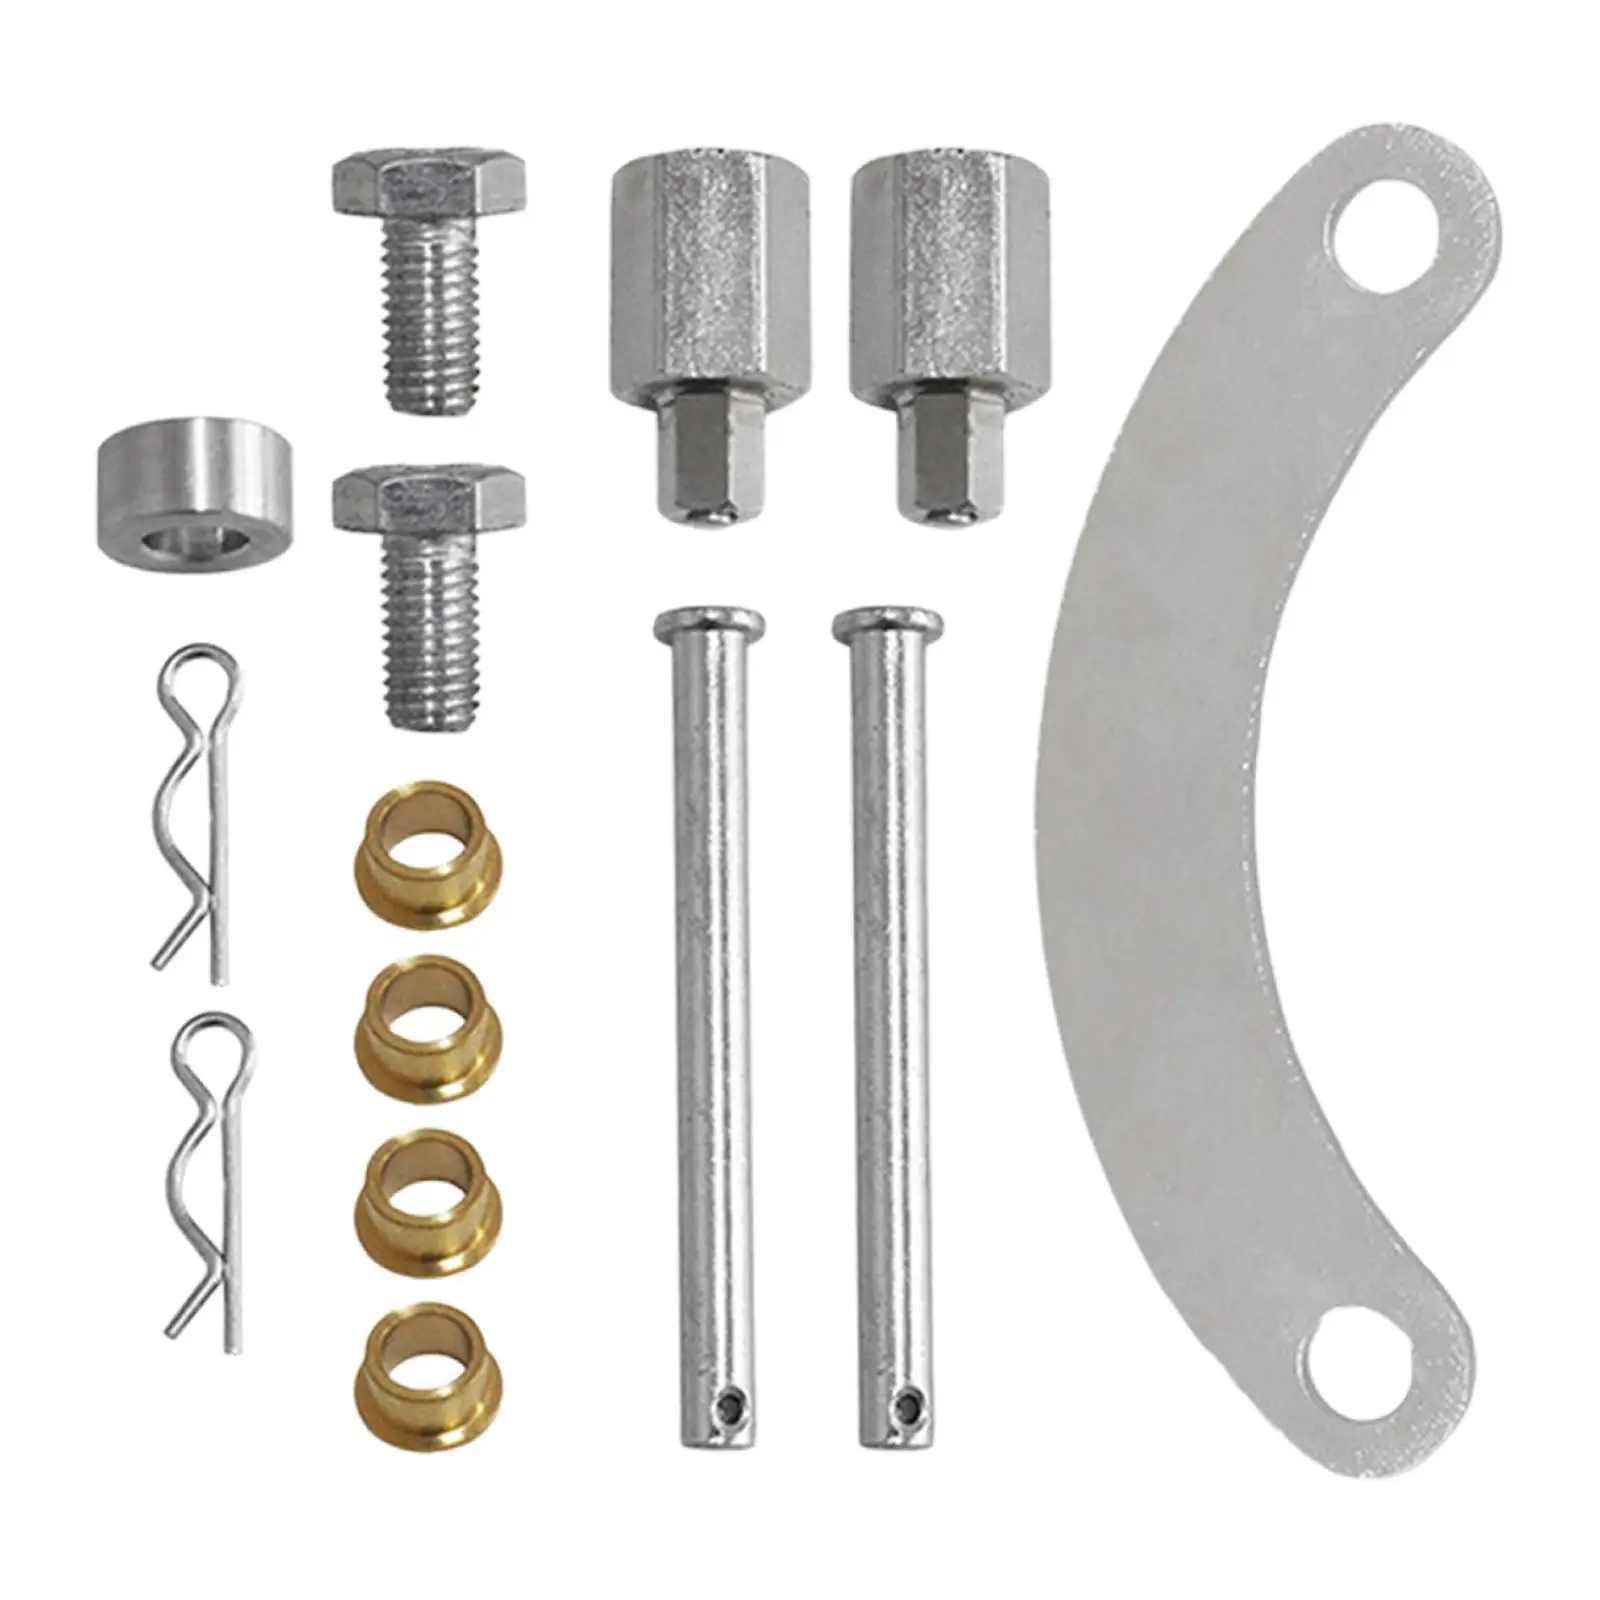 cam Gear Lock set Replaces Accessories for Subaru WRX Sti Fxt Lgt Professional Assembly Spare Parts Easy to Install